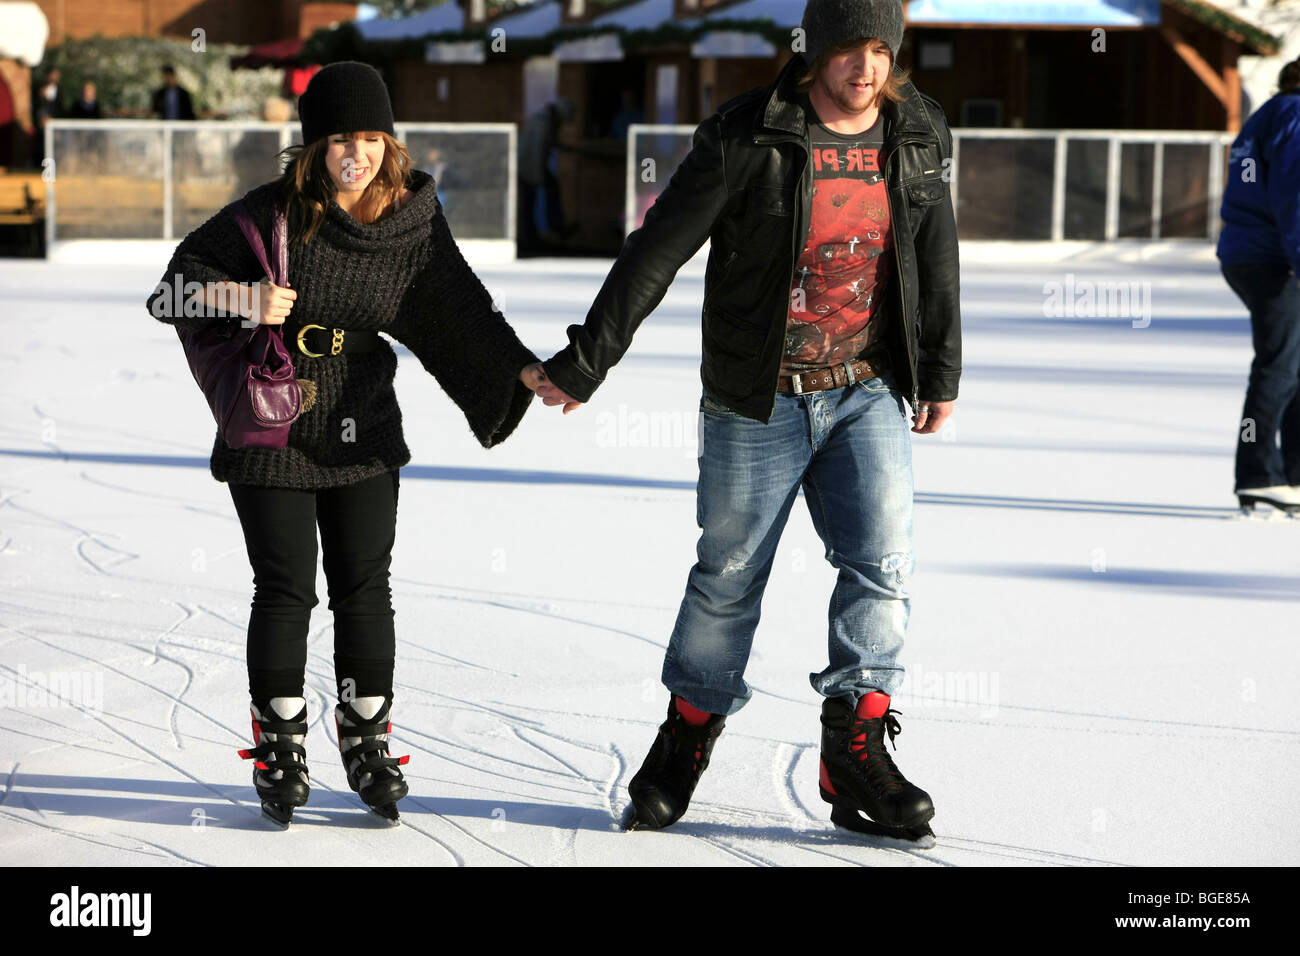 Young Adult man and woman ice skating at an outdoor rink Stock Photo